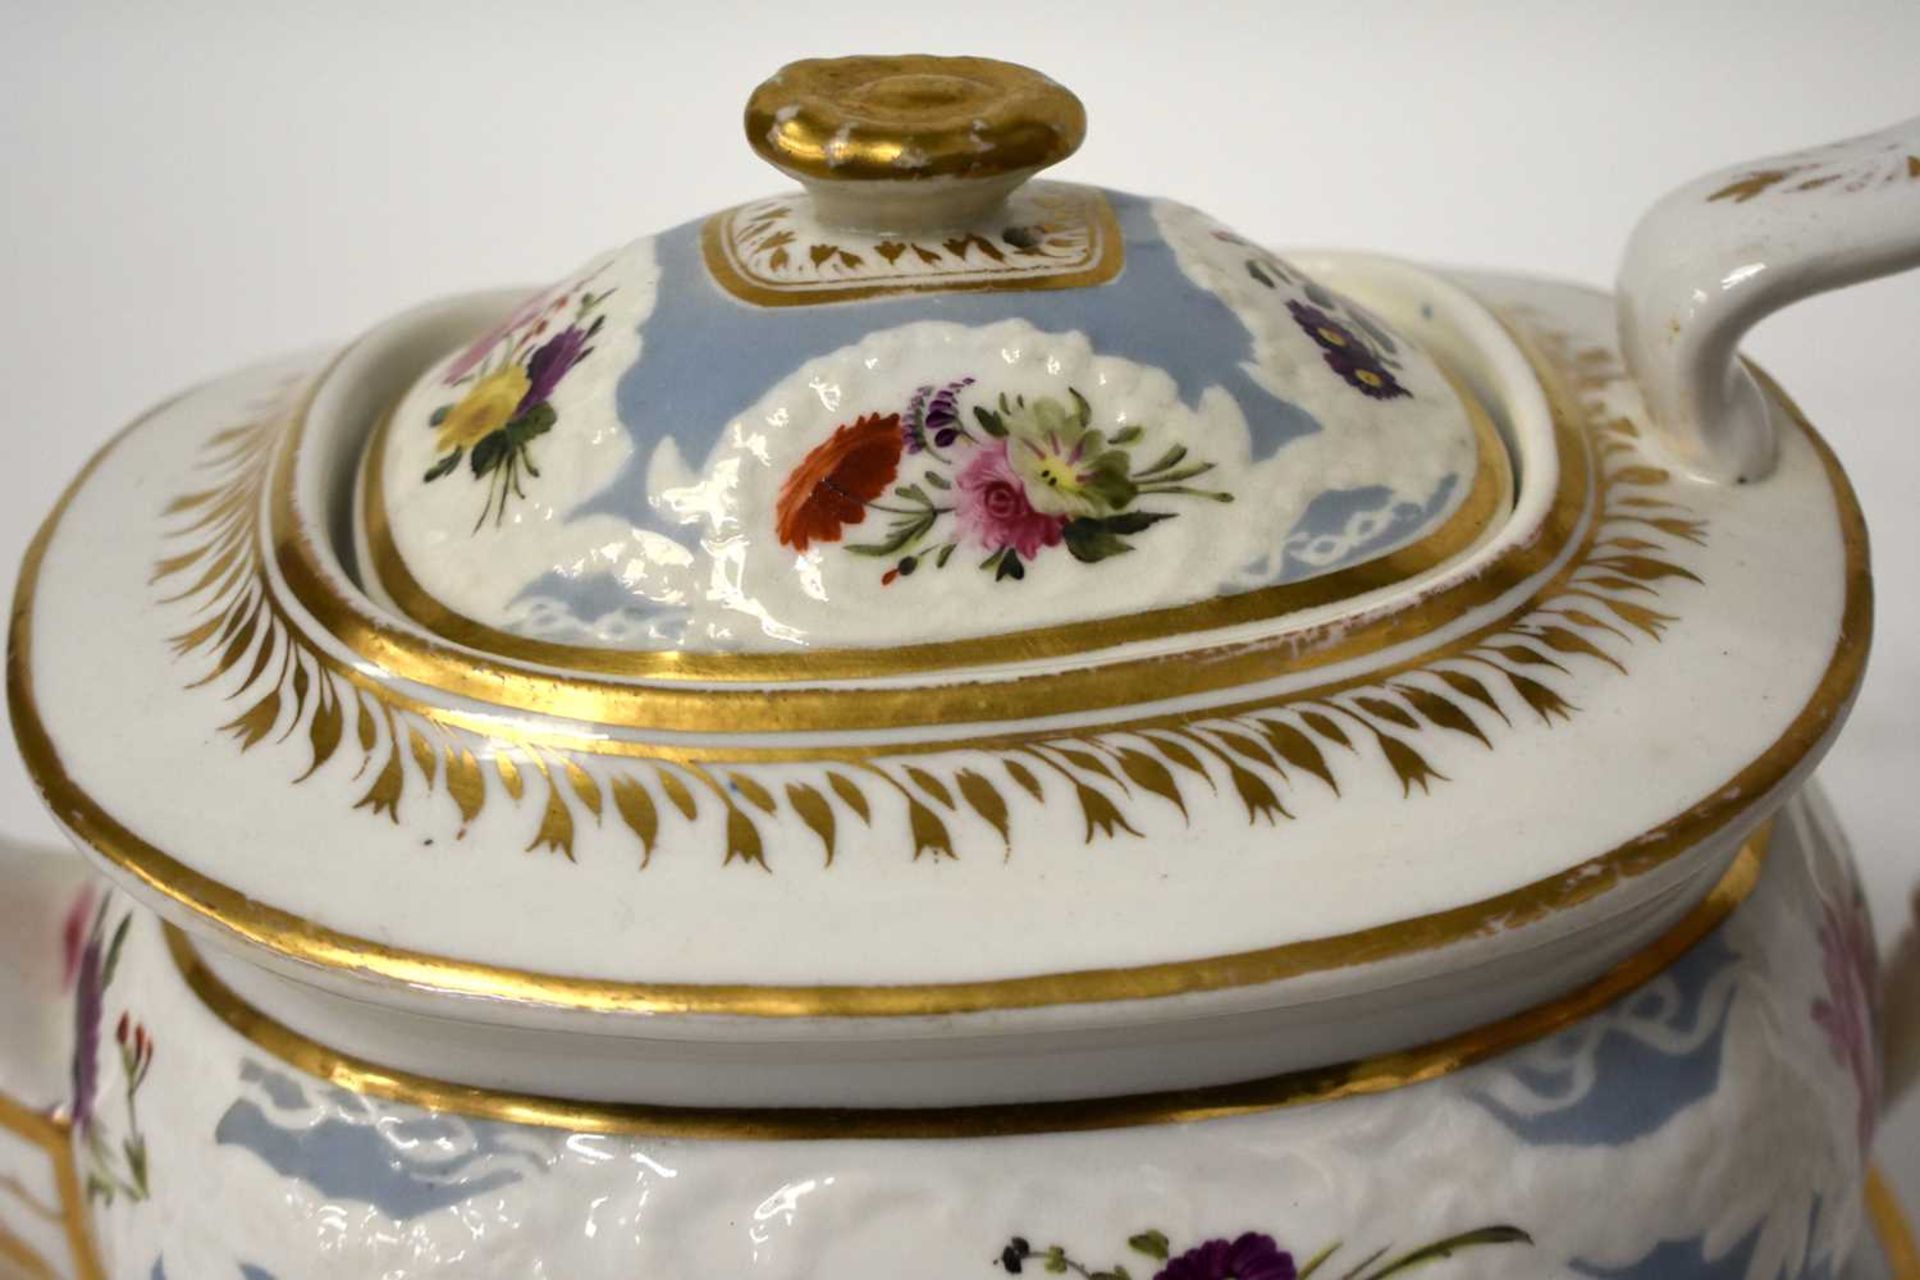 AN EARLY 19TH CENTURY CHAMBERLAINS WORCESTER PART TEASET painted with floral sprays, under a moulded - Image 23 of 36